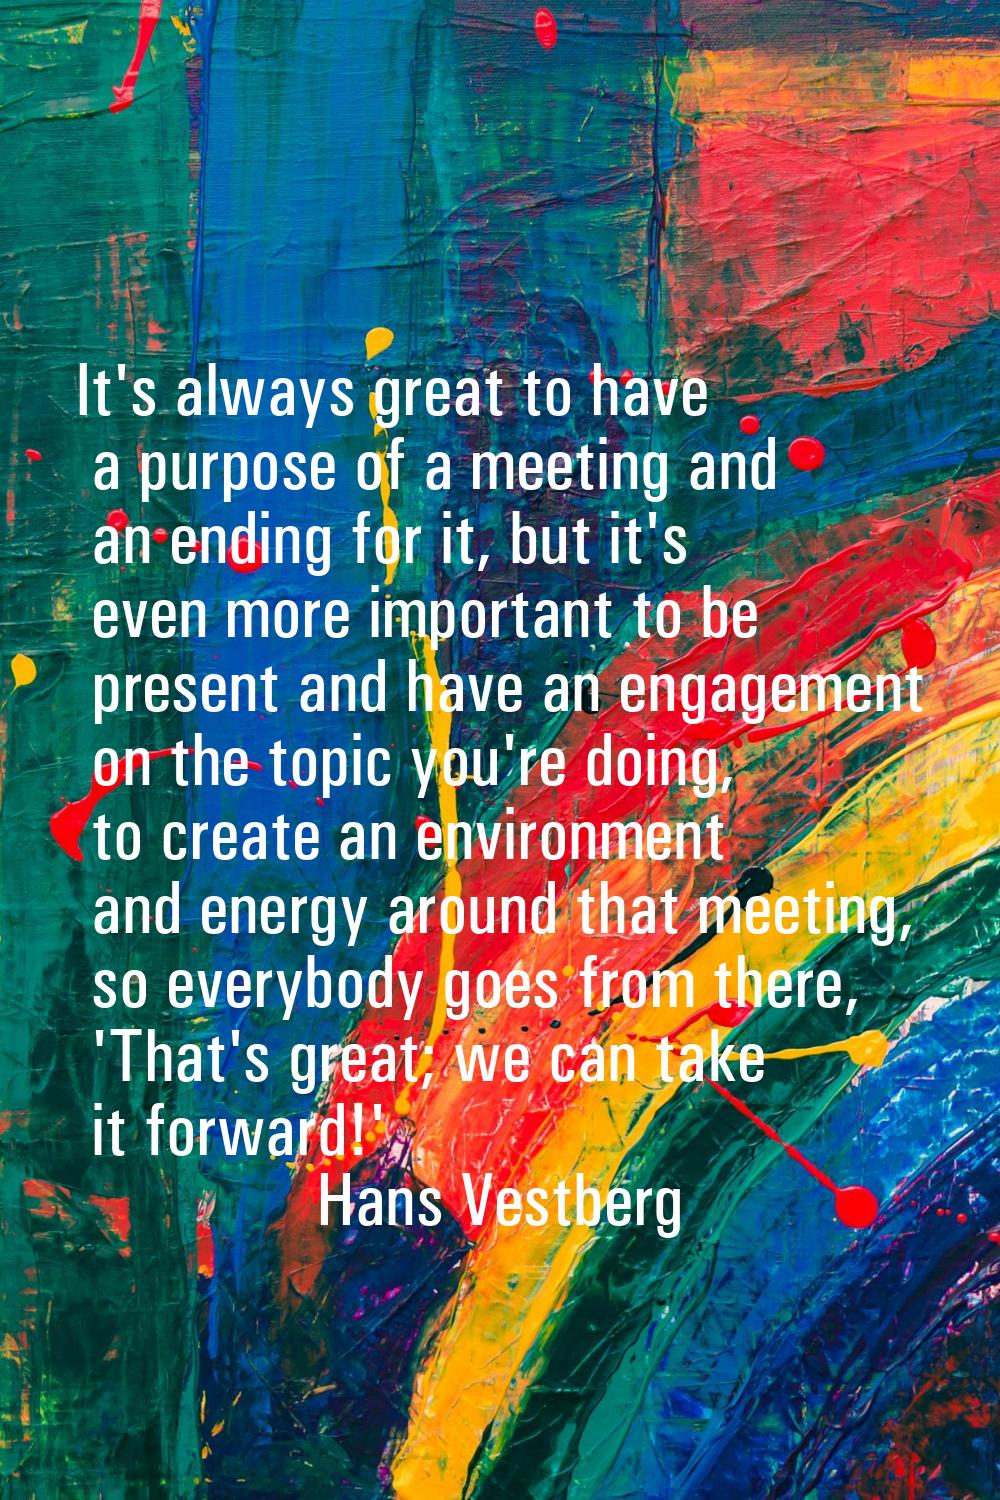 It's always great to have a purpose of a meeting and an ending for it, but it's even more important